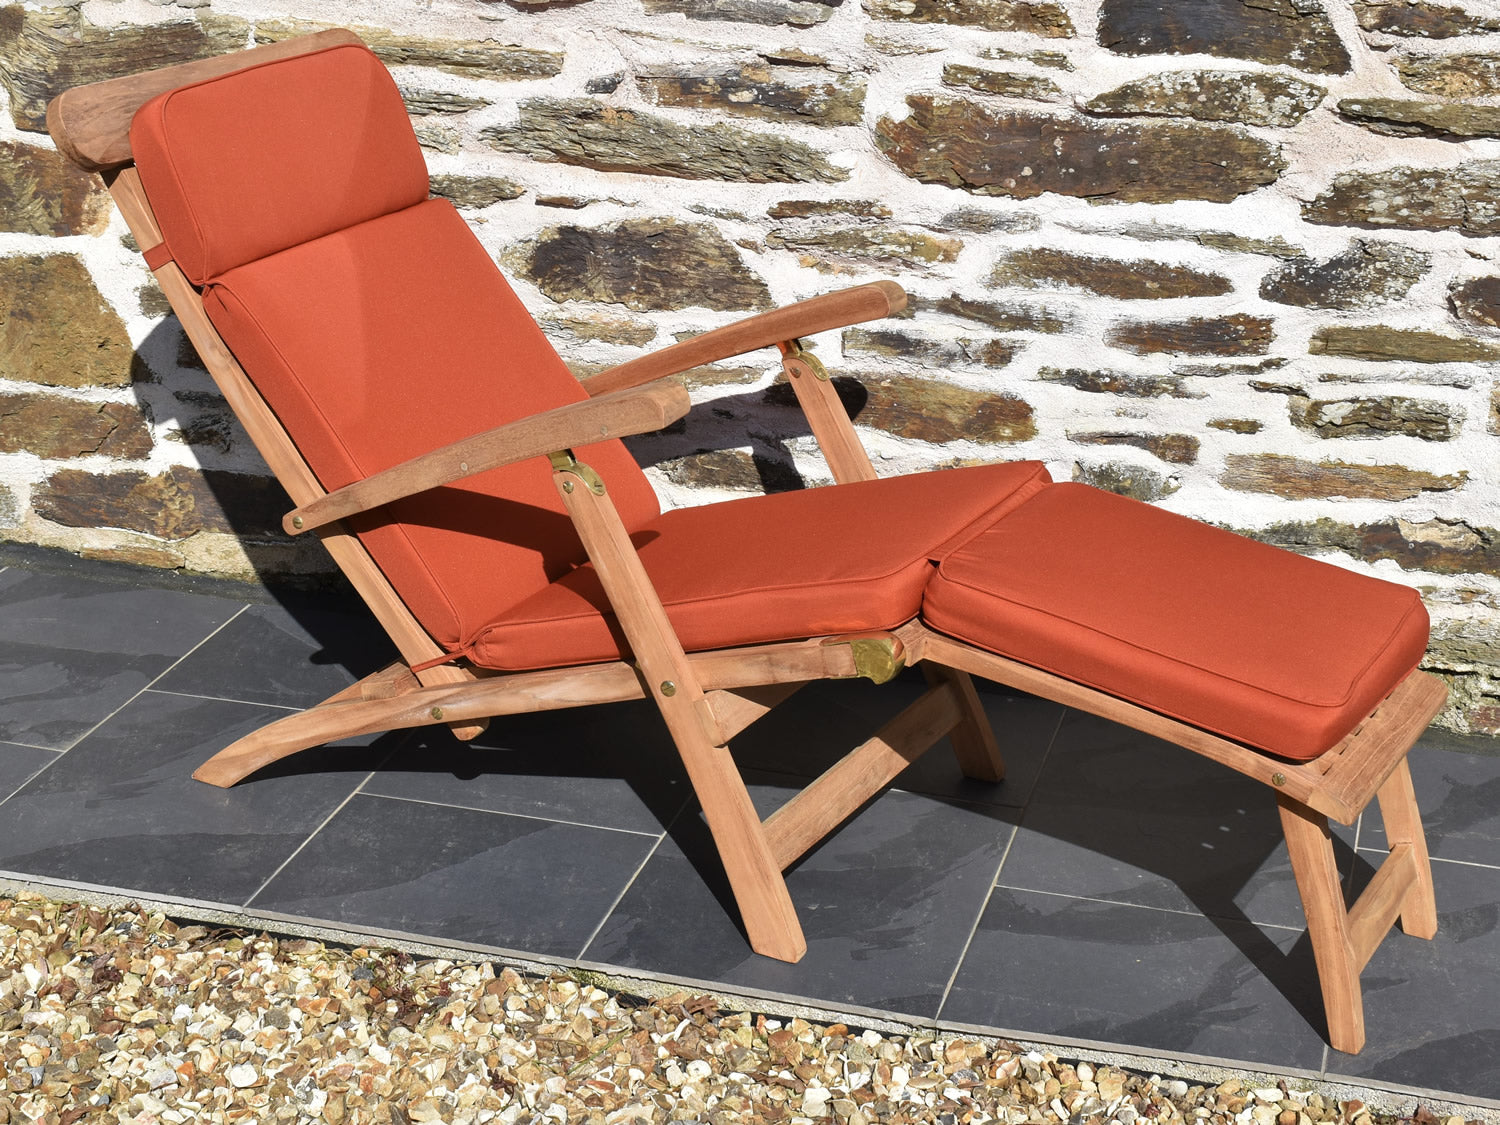 traditional outdoor seamer recliner chair cushion in terracotta orange colour